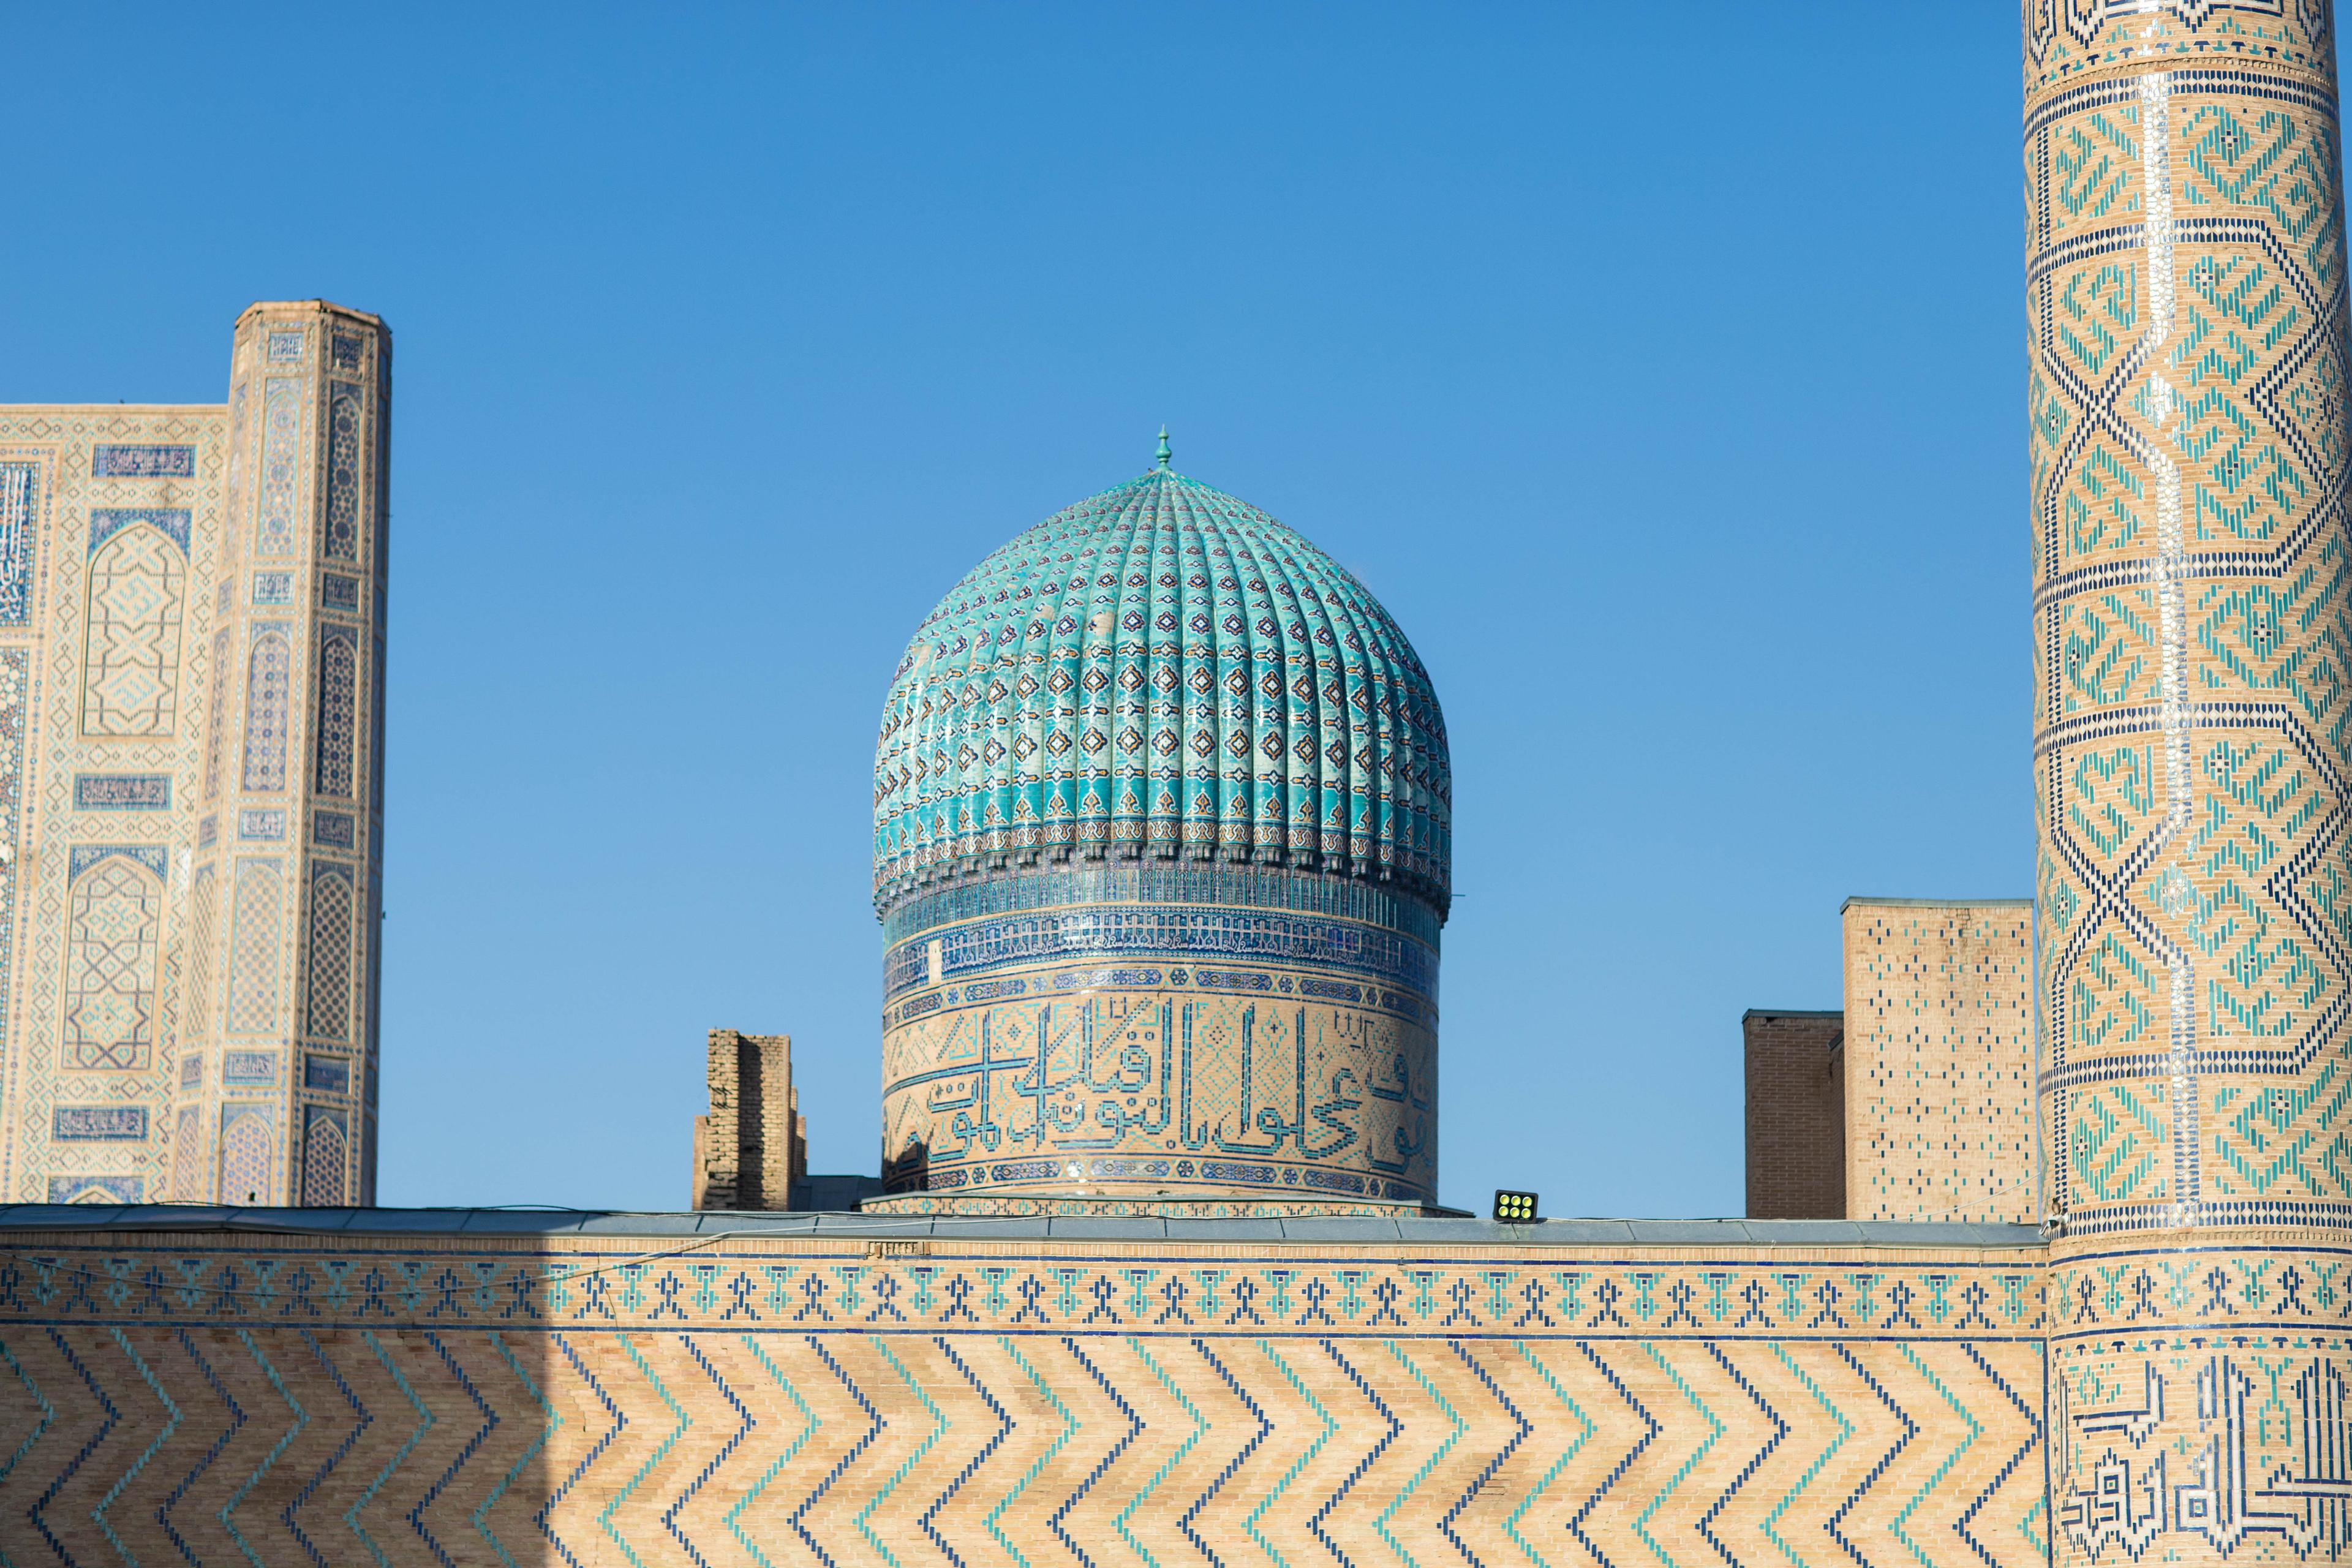 Cover image of this place Bibi Khanim Mosque 